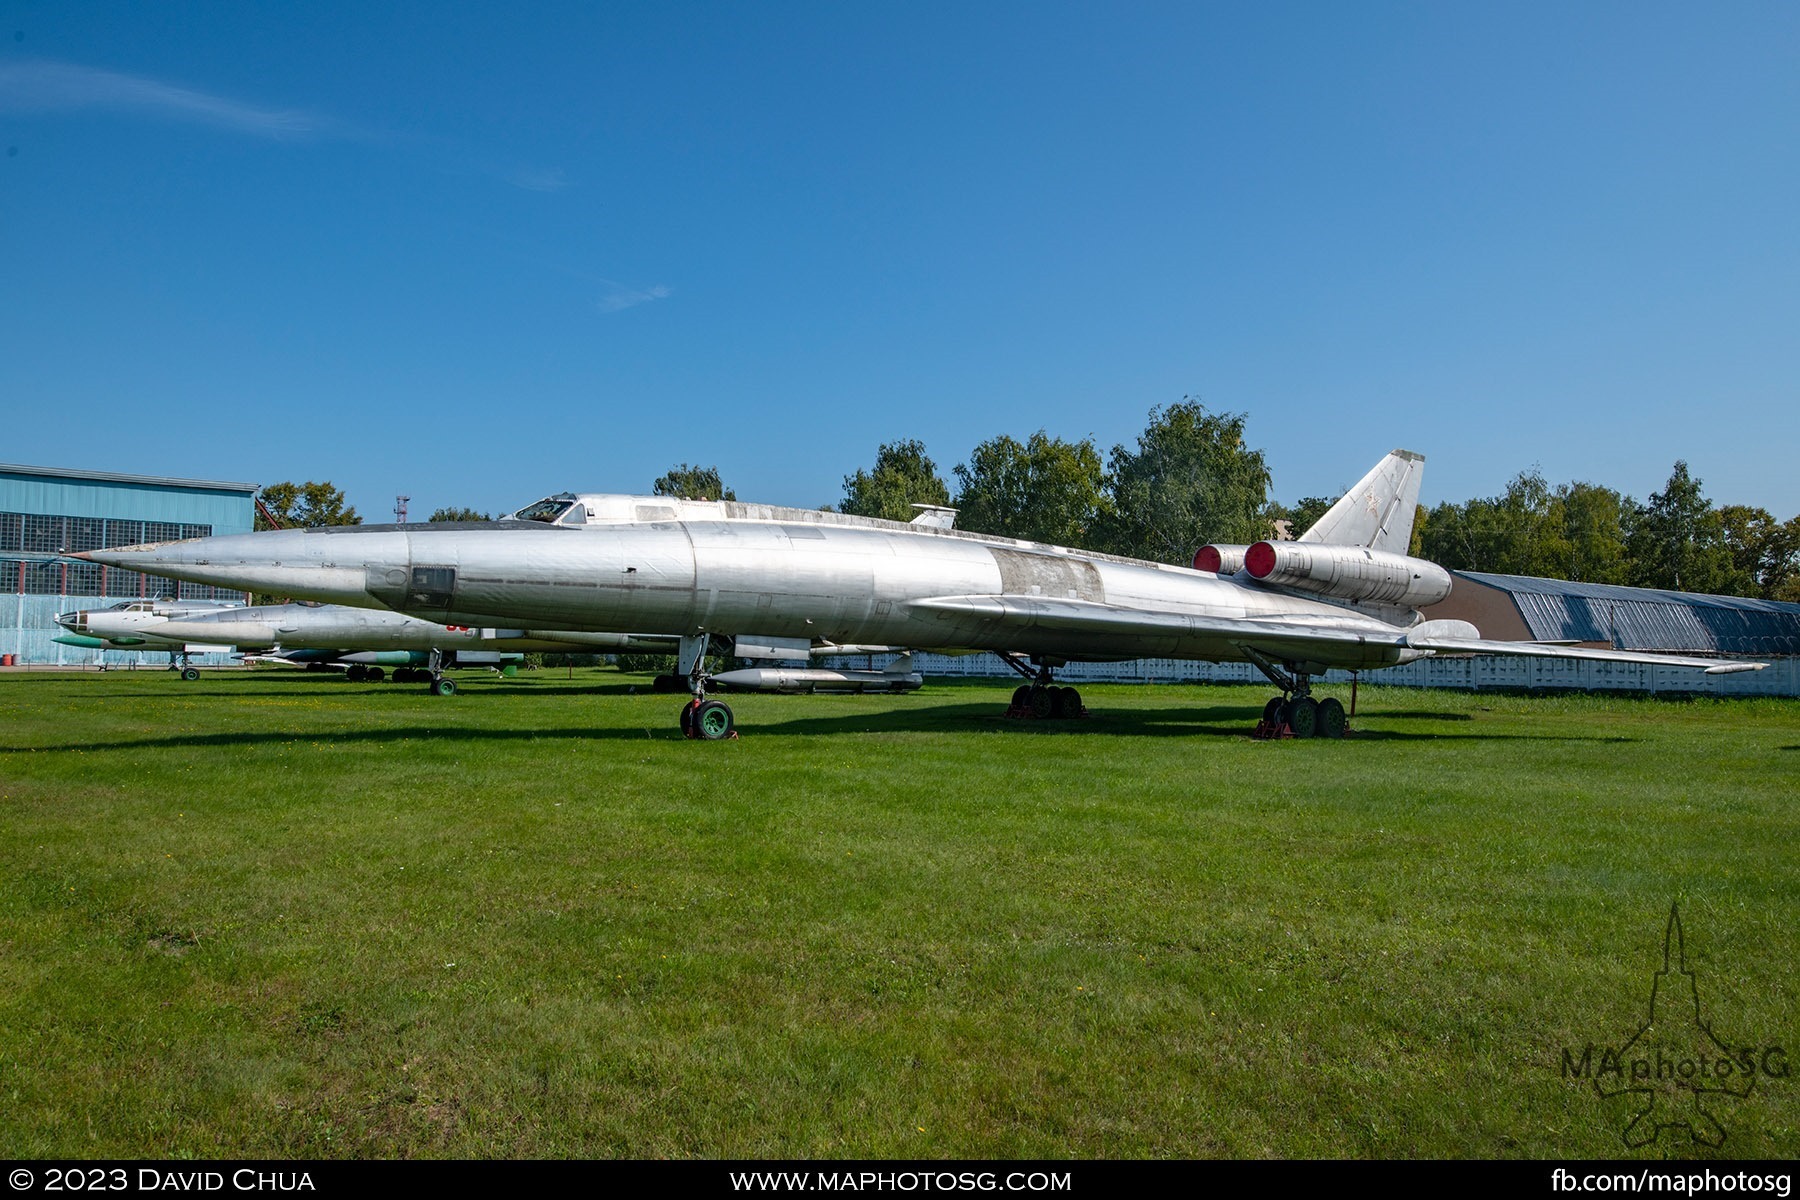 Tupolev Tu-22. The first Soviet supersonic long-range sweep-wing jet bomber.